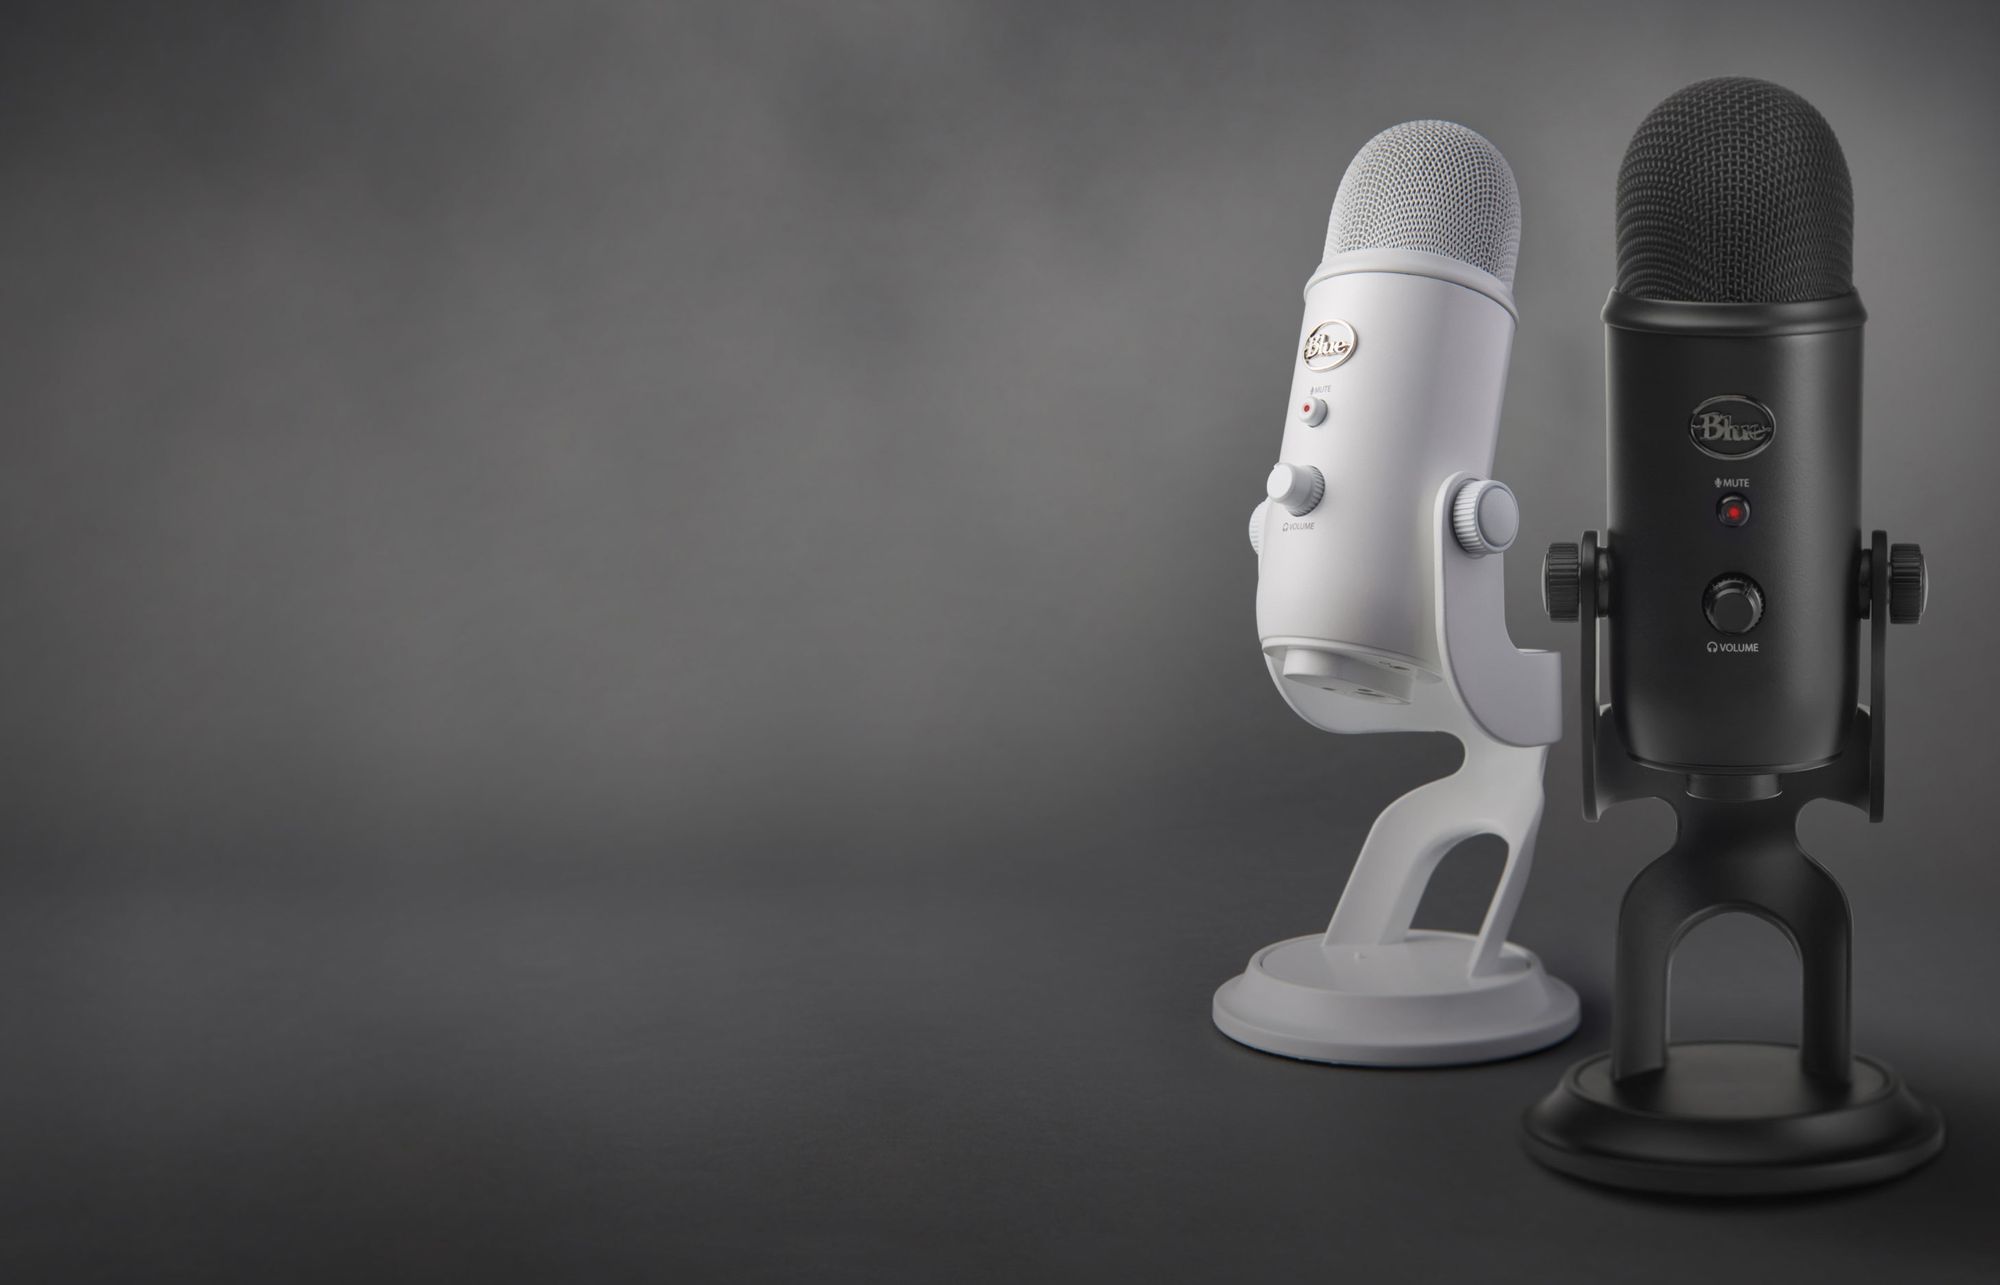 Blue Yeti microphone, reliable plug and play